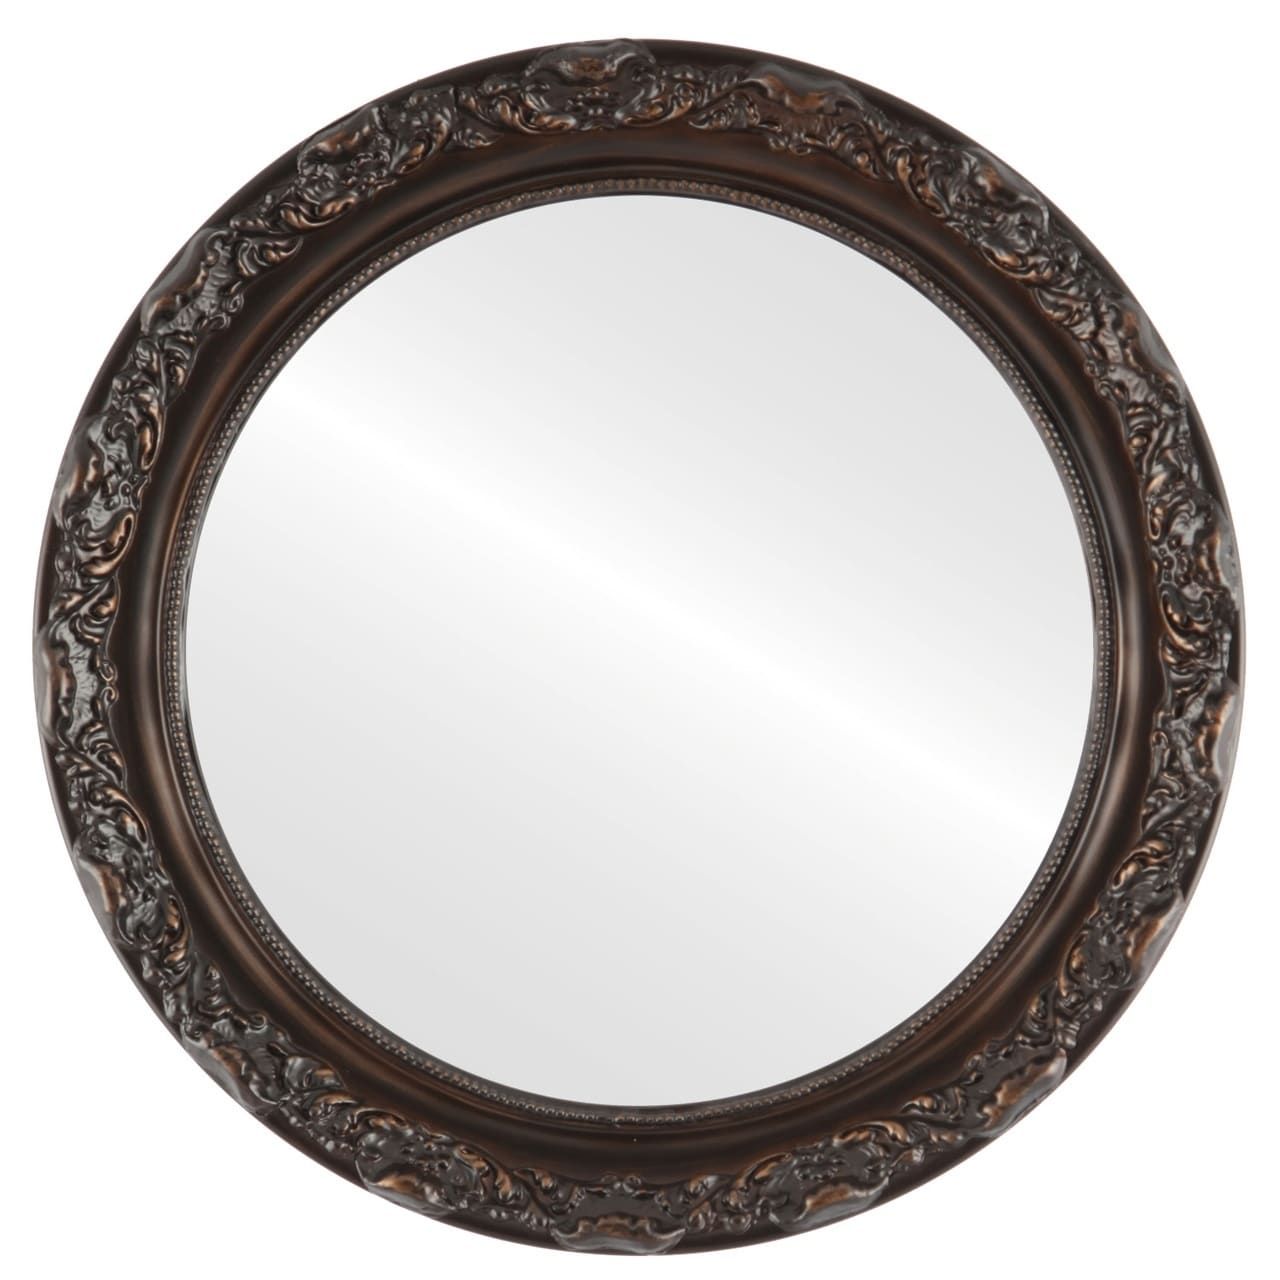 Rome Framed Round Mirror In Rubbed Bronze – Antique Bronze | Ebay Throughout Round Scalloped Wall Mirrors (View 9 of 15)